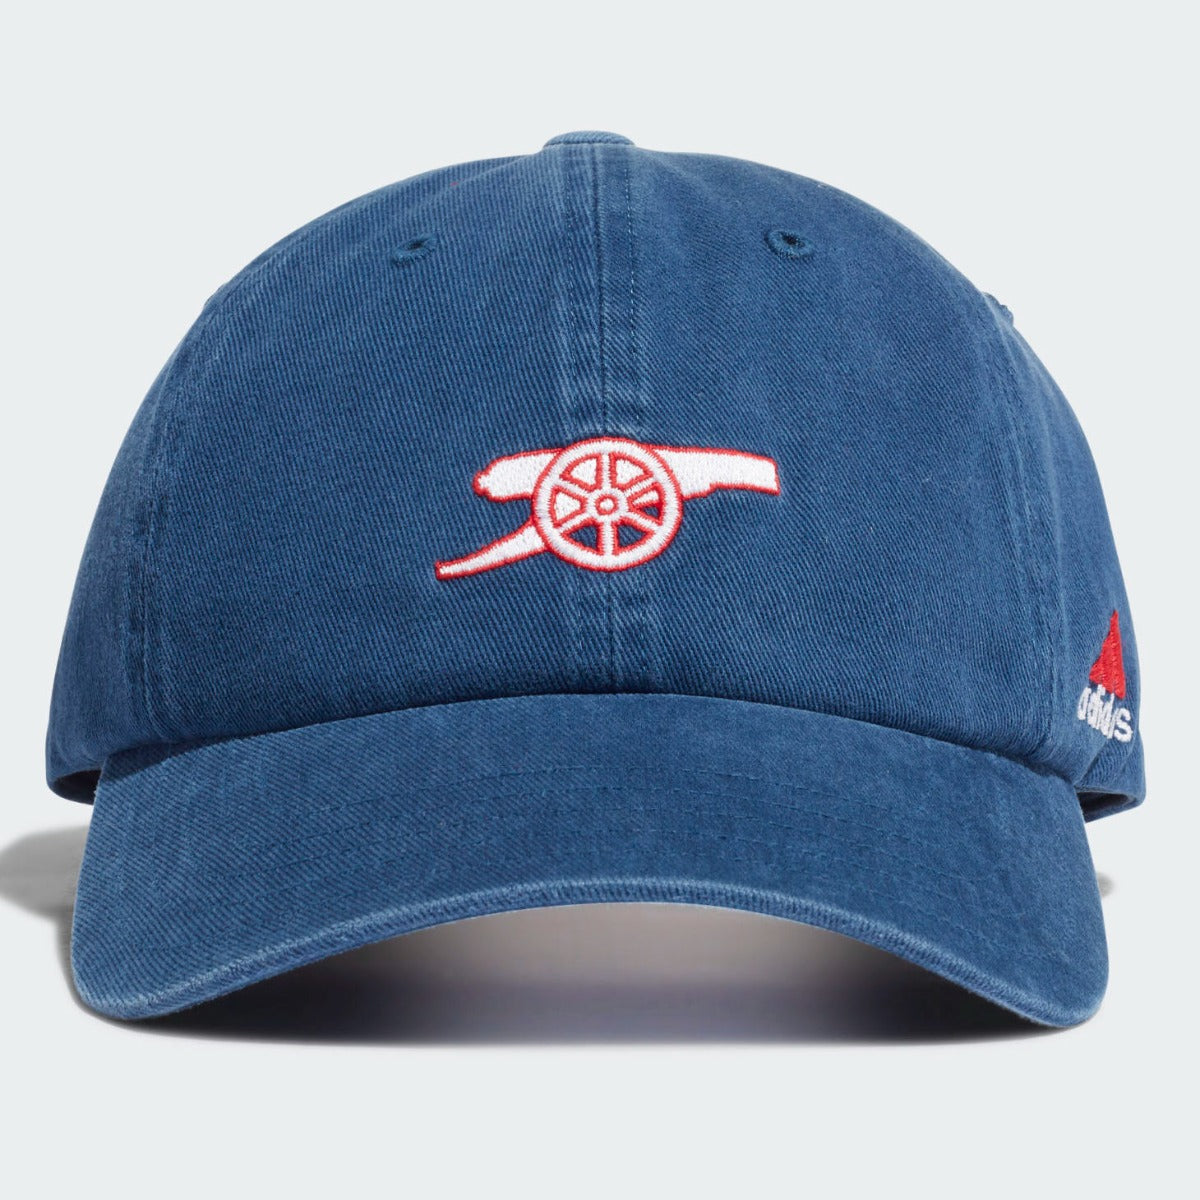 Adidas 2021-22 Arsenal Dad Cap - Mystery Blue (Front)